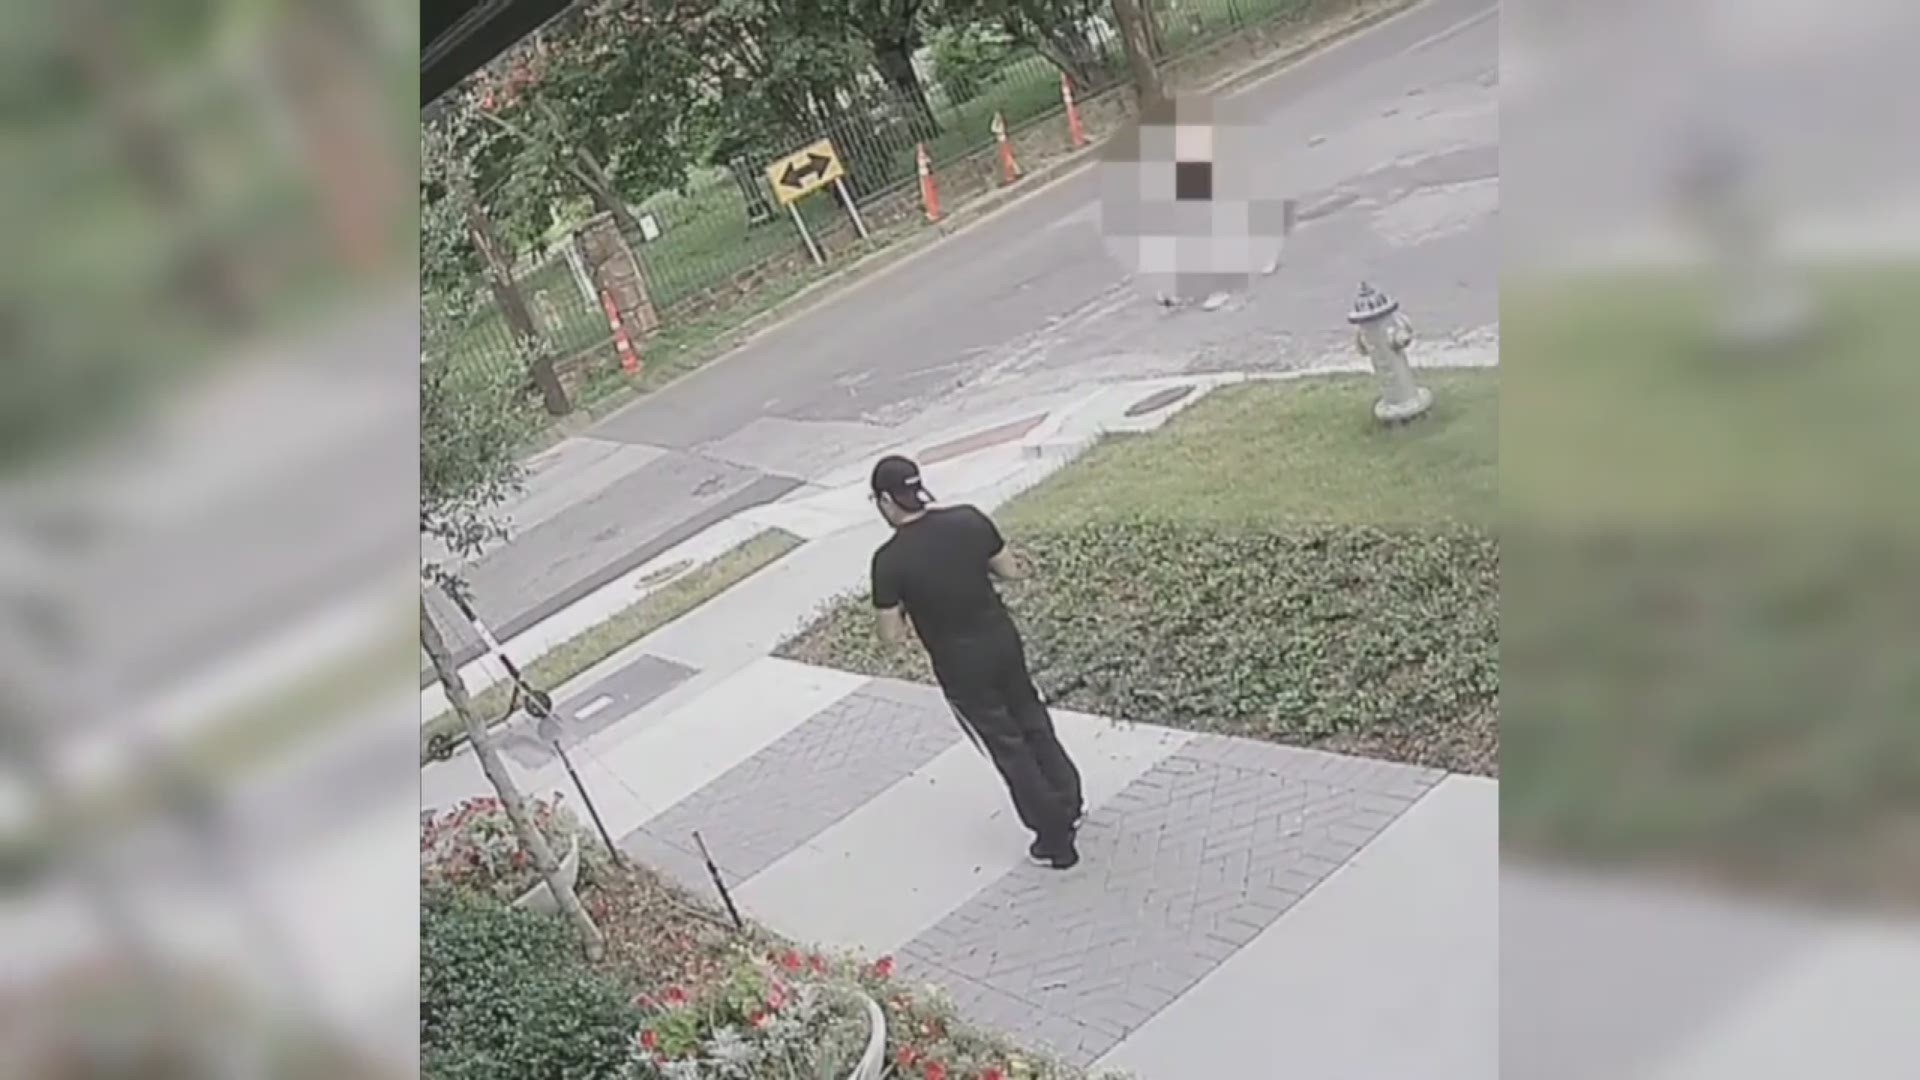 Police released video that shows a man in Uptown follow a woman before she was attacked on June 23, 2019 in Dallas. A search is underway for the man.